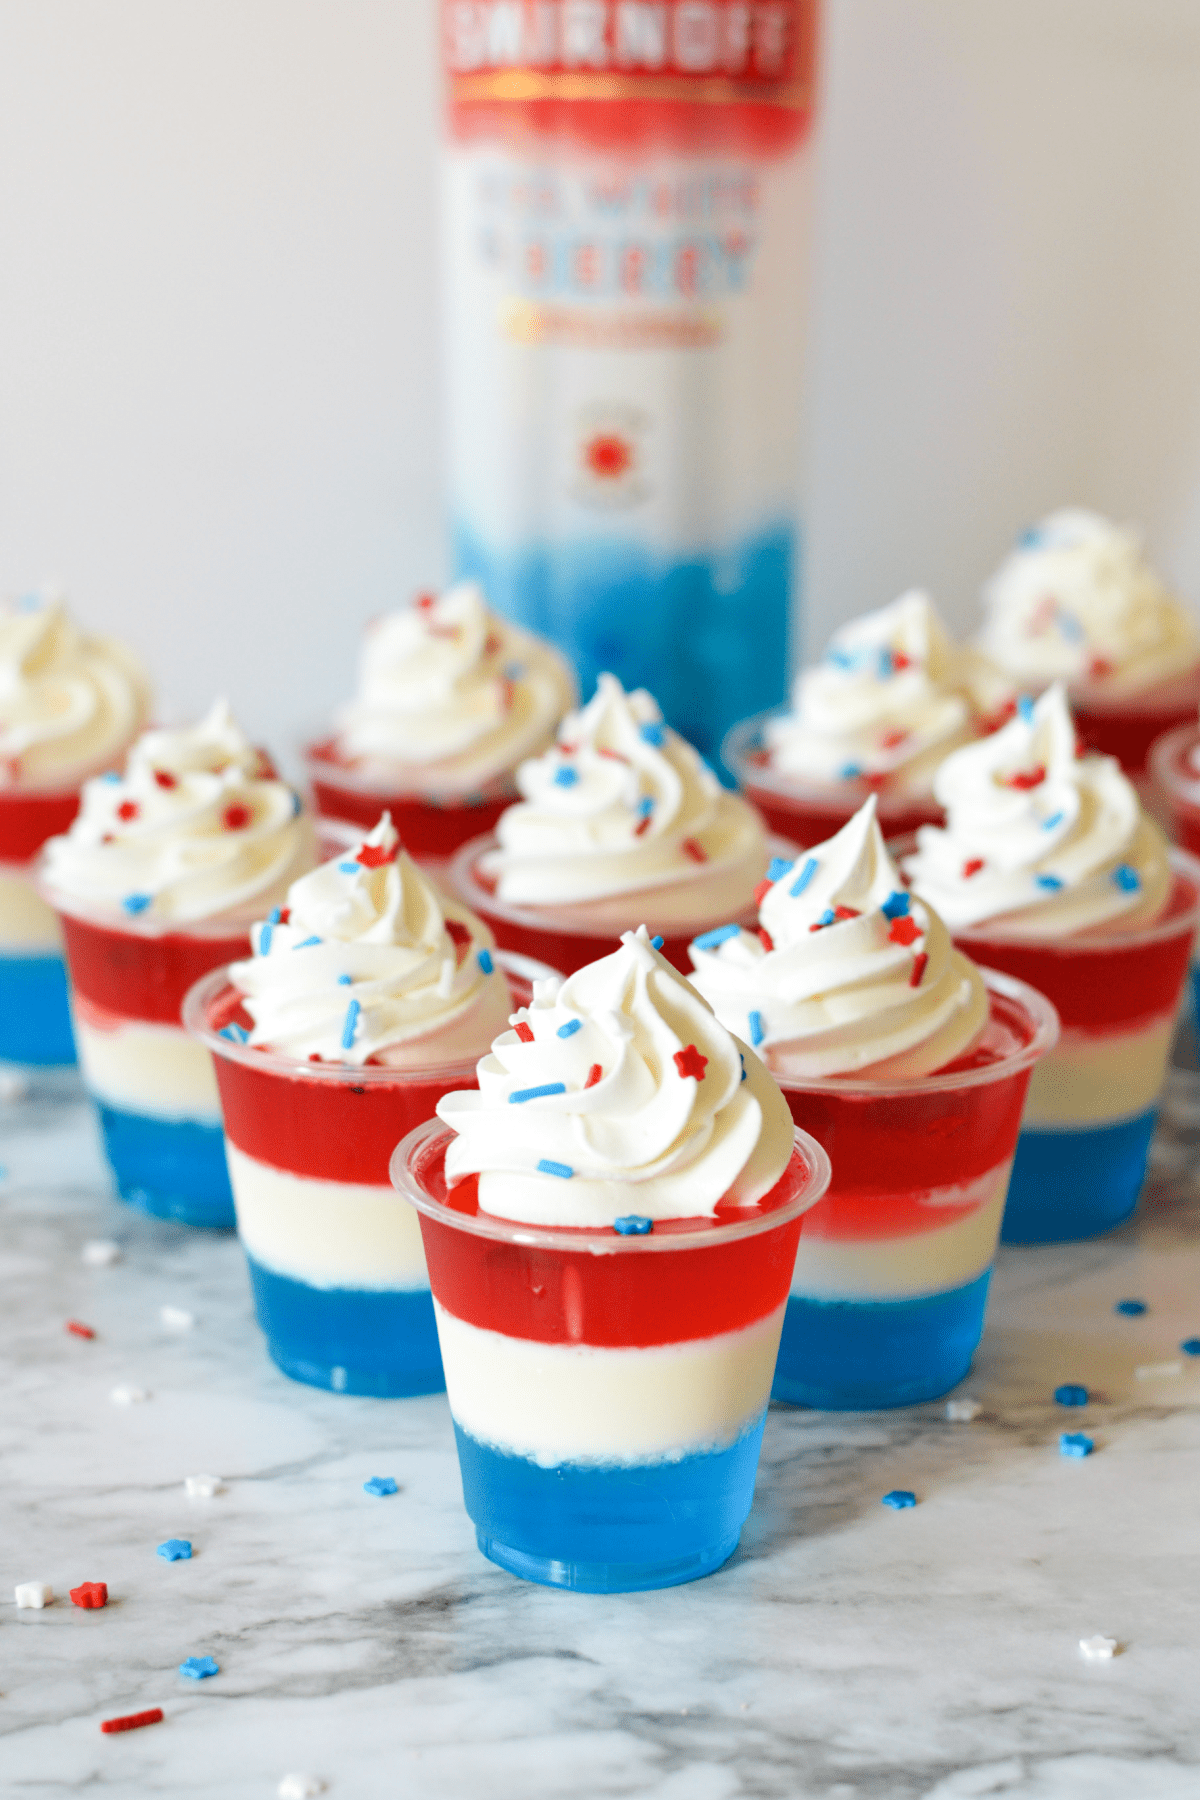 Red, white and blue jello shots with vodka bottle